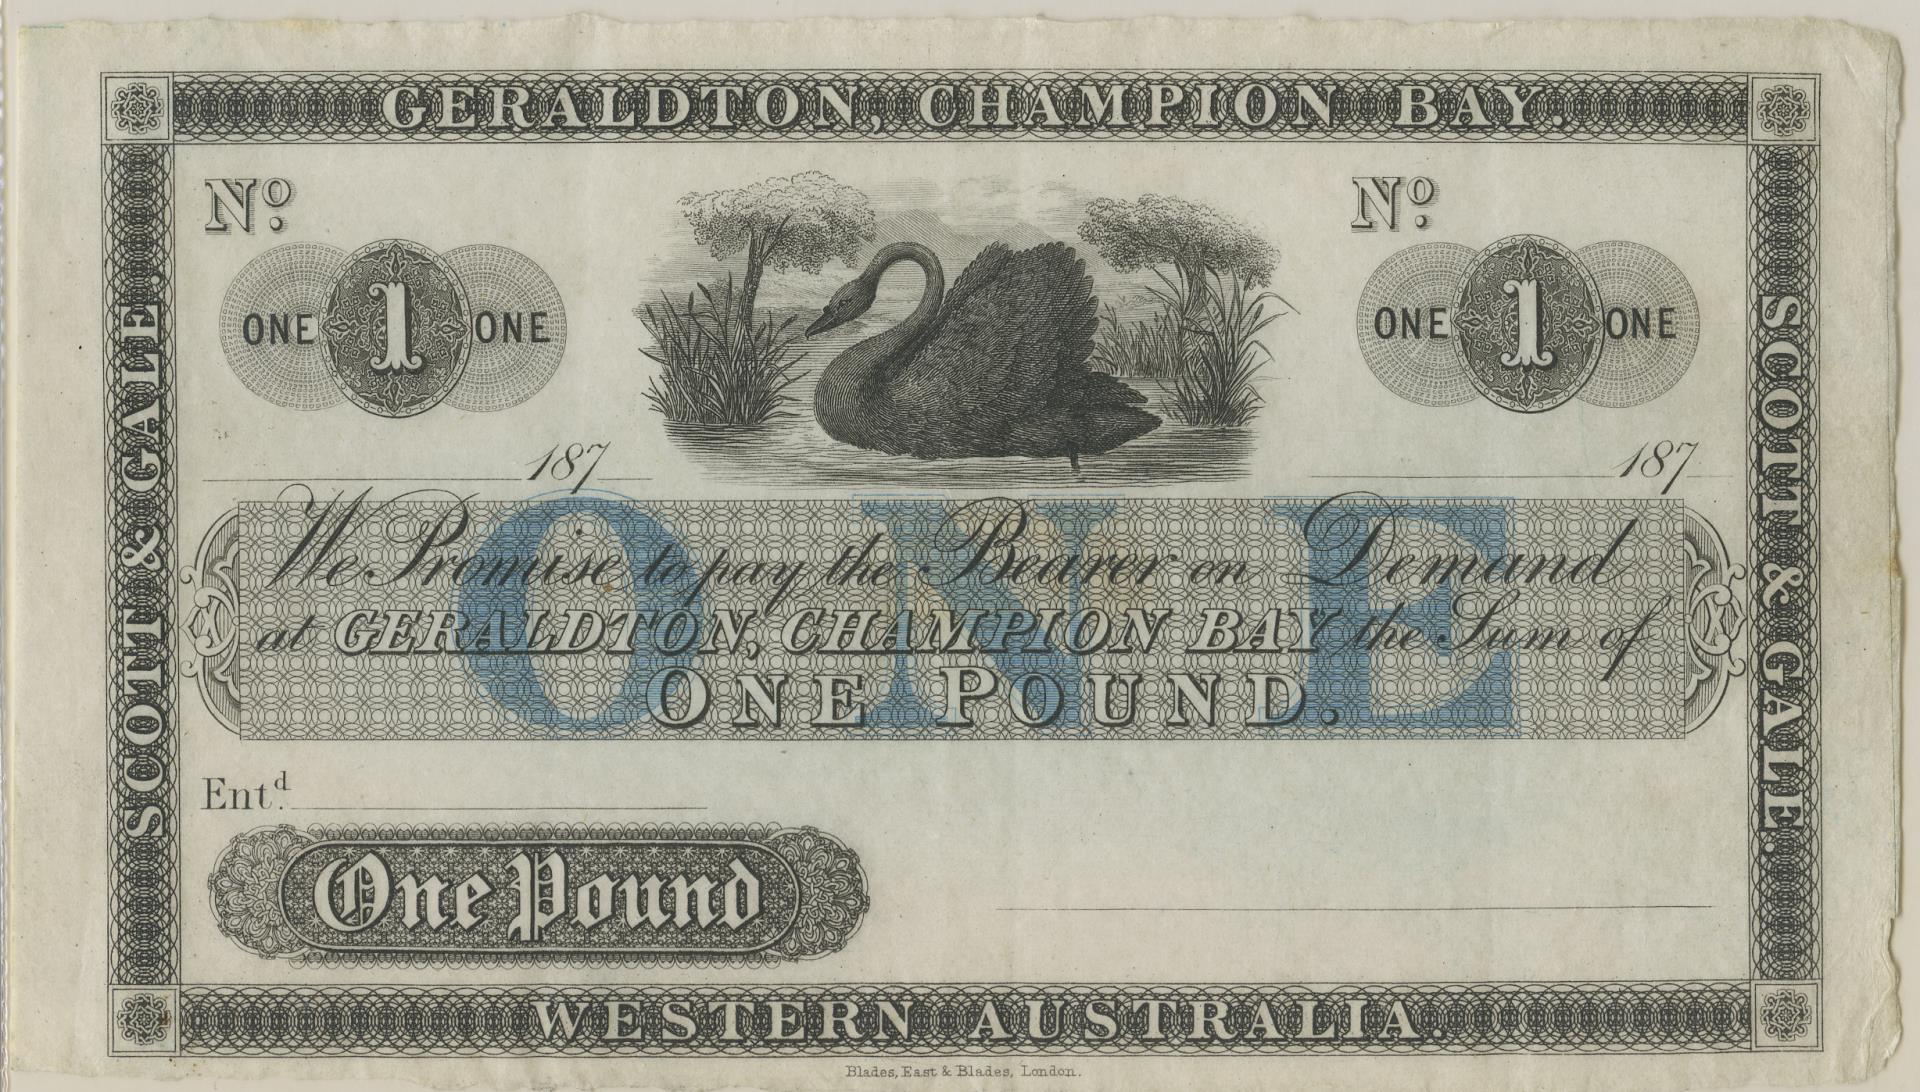 City of Greater Geraldton’s Heritage Collection has welcomed a second One Pound Trader’s Note.